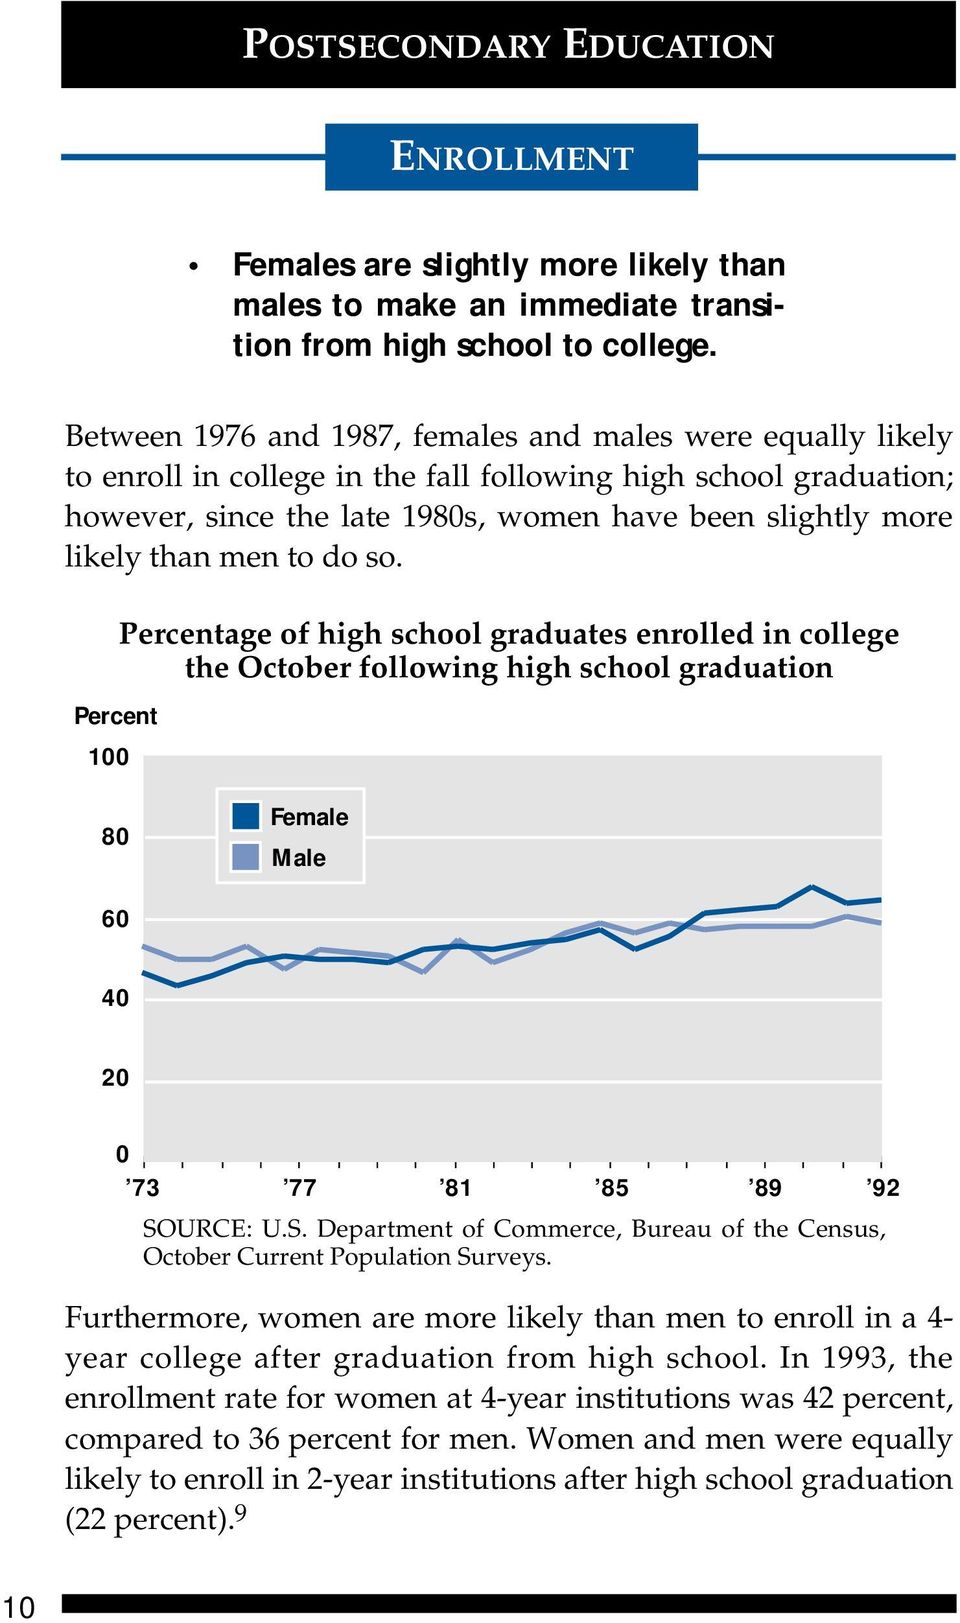 than men to do so. Percent 100 Percentage of high school graduates enrolled in college the October following high school graduation 80 Female Male 60 40 20 0 73 77 81 85 89 92 SO